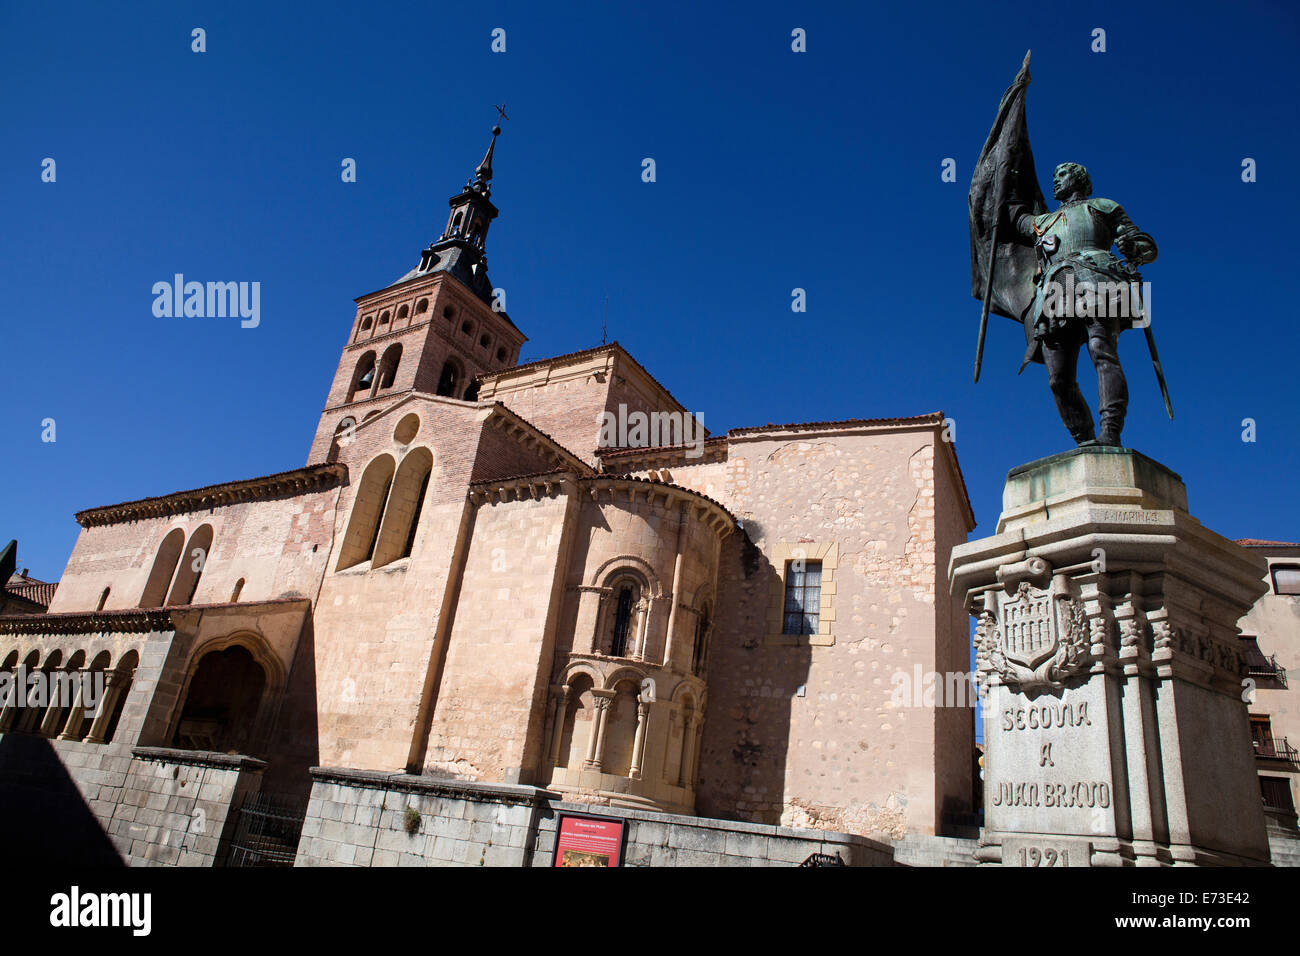 Spain, Castille Leon, Segovia, Statue of Juan Bravo by A.Marinas with Church of St Martin in the background. Stock Photo